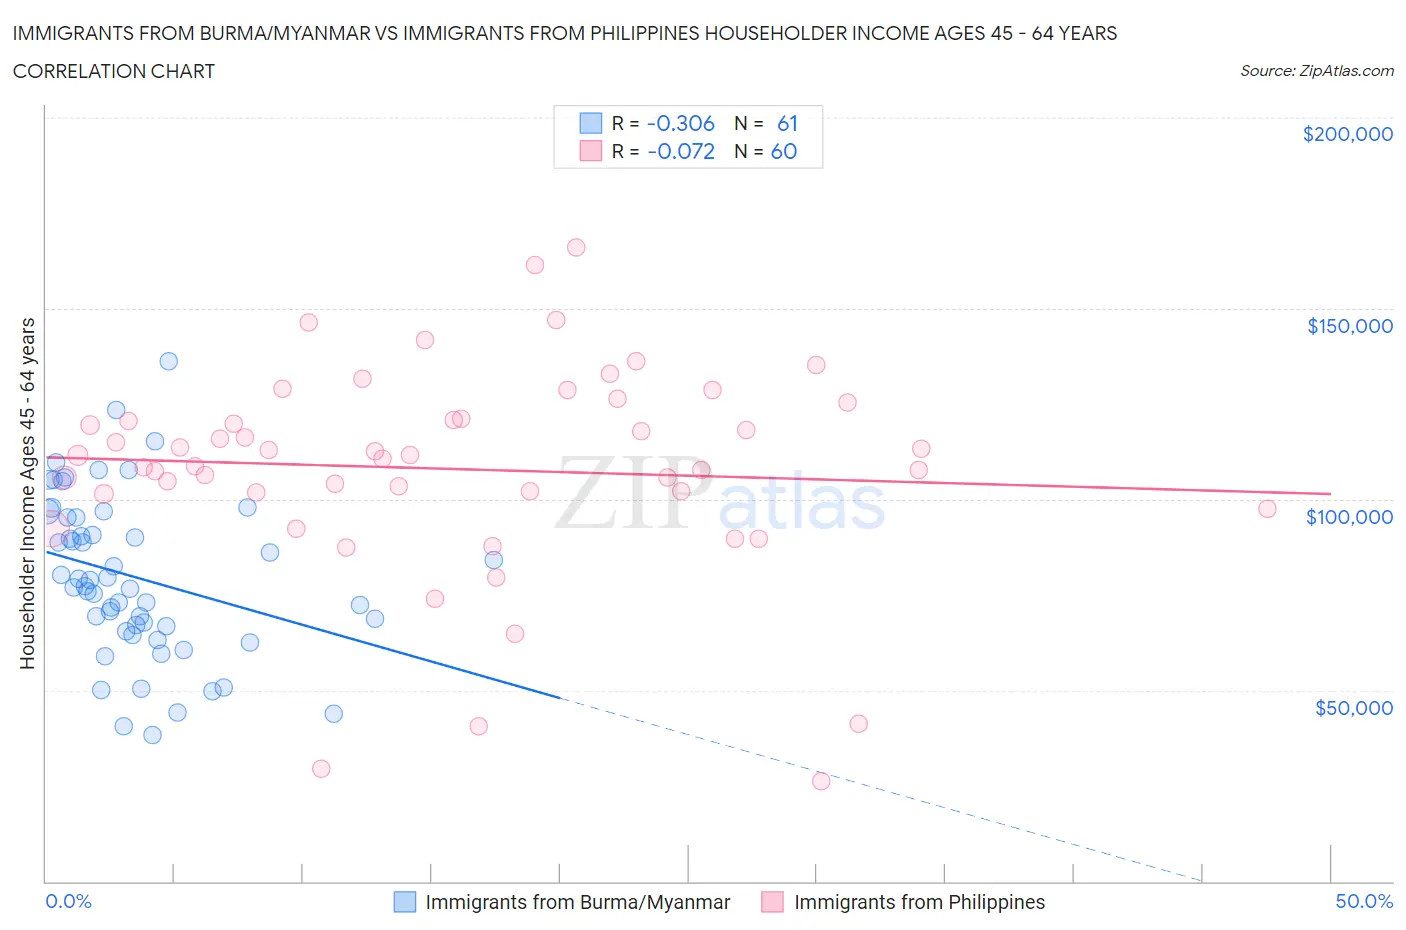 Immigrants from Burma/Myanmar vs Immigrants from Philippines Householder Income Ages 45 - 64 years